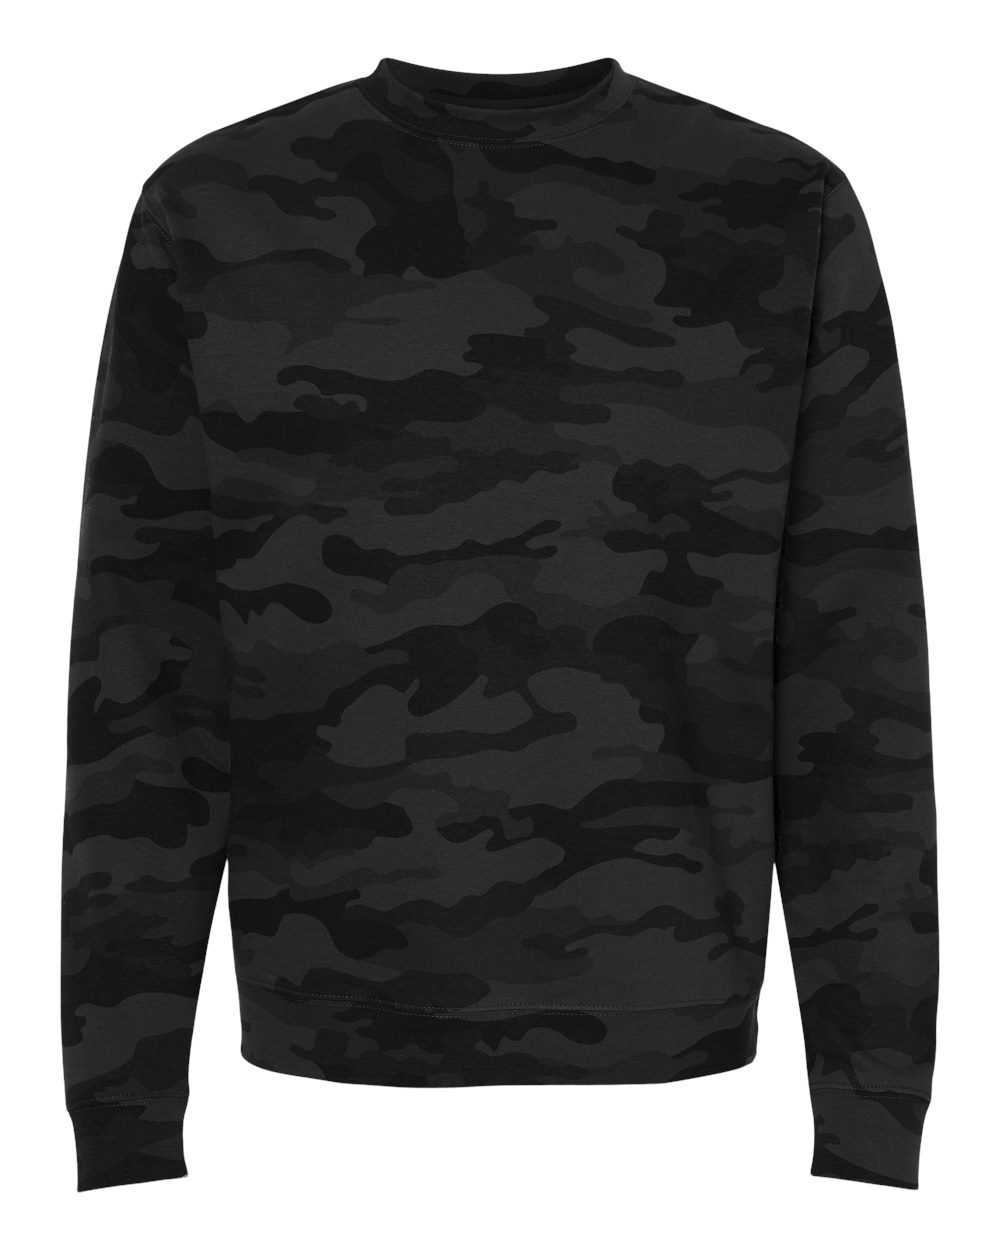 Independent Trading Co SS3000 Midweight Sweatshirt - Black Camo - HIT a Double - 1